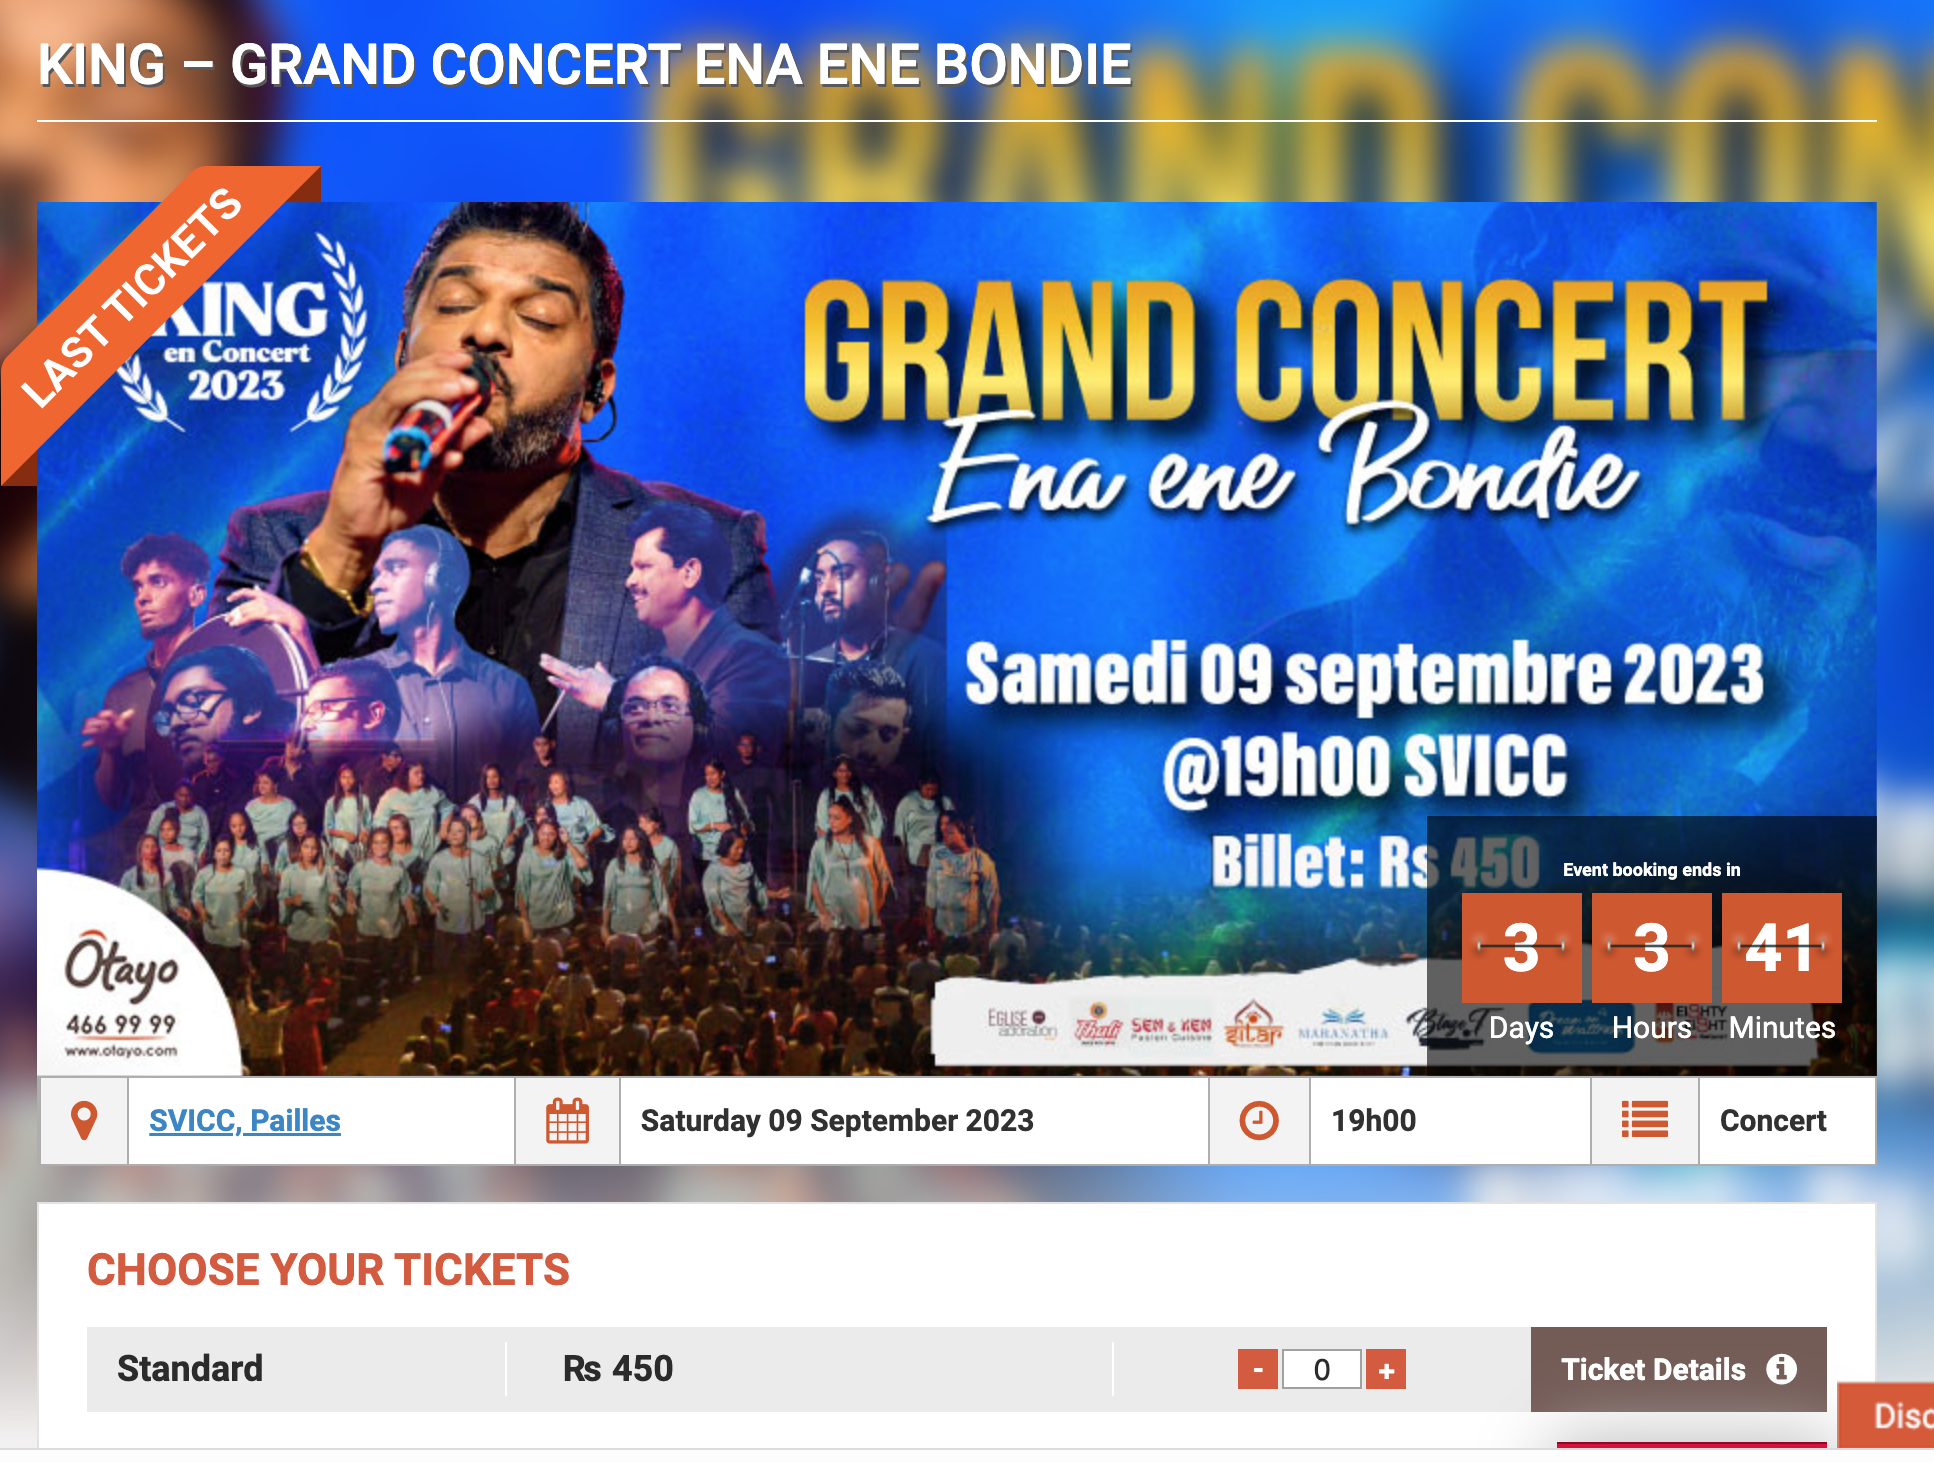 Weekend Events in Beautiful Mauritius- Grand Concert in Mauritius-KING – GRAND CONCERT ENA ENE BONDIE